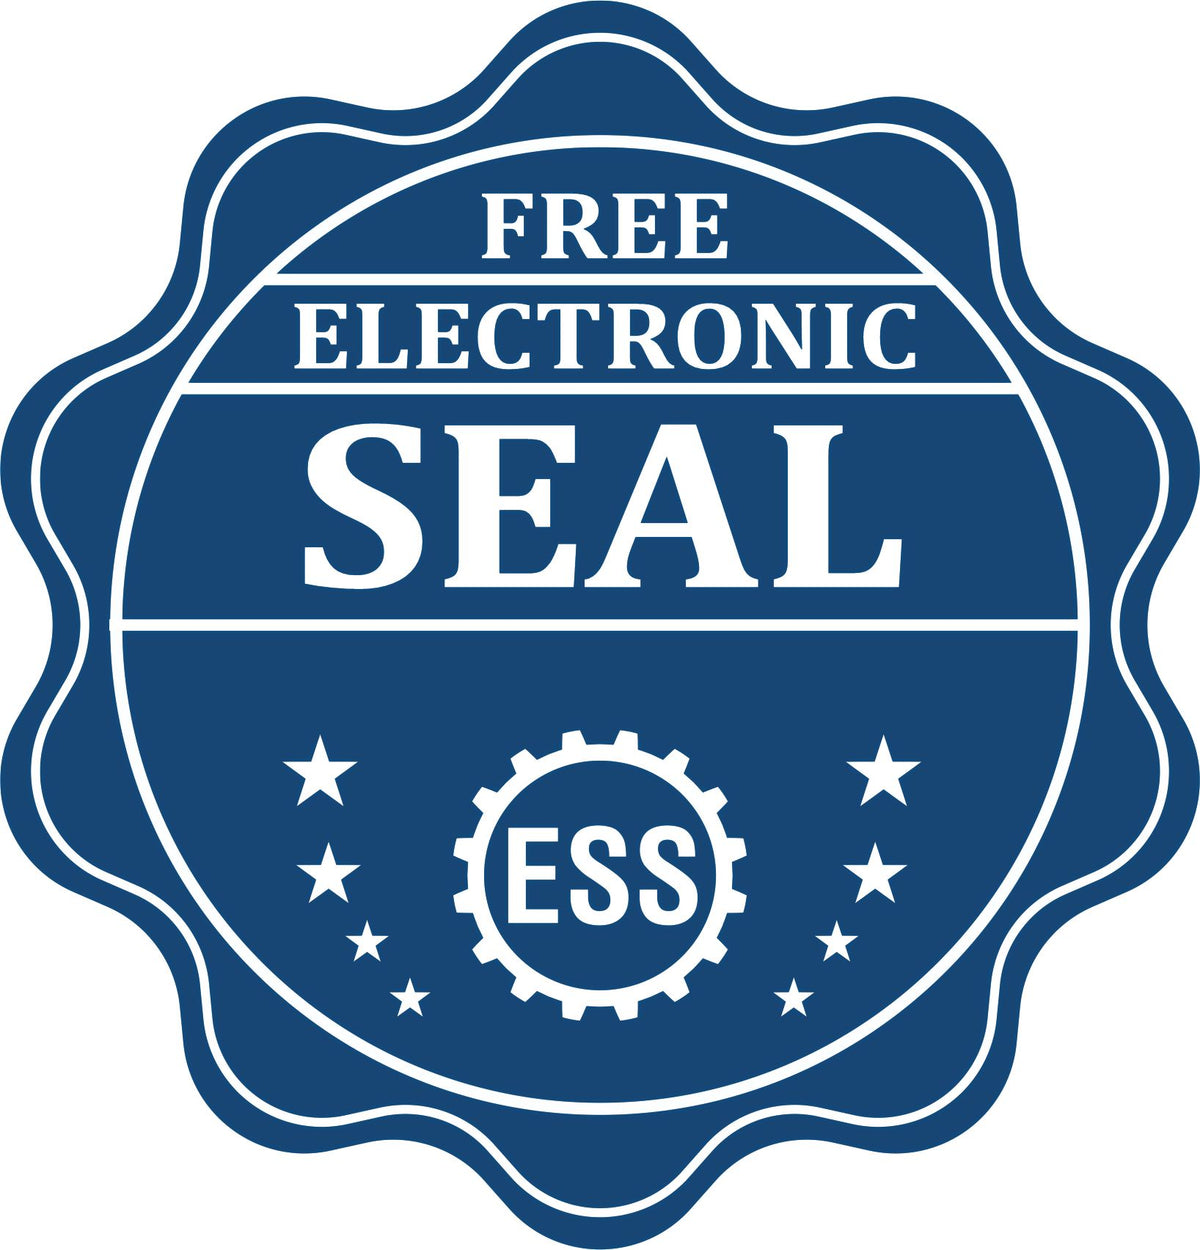 A badge showing a free electronic seal for the Illinois Engineer Desk Seal with stars and the ESS gear on the emblem.